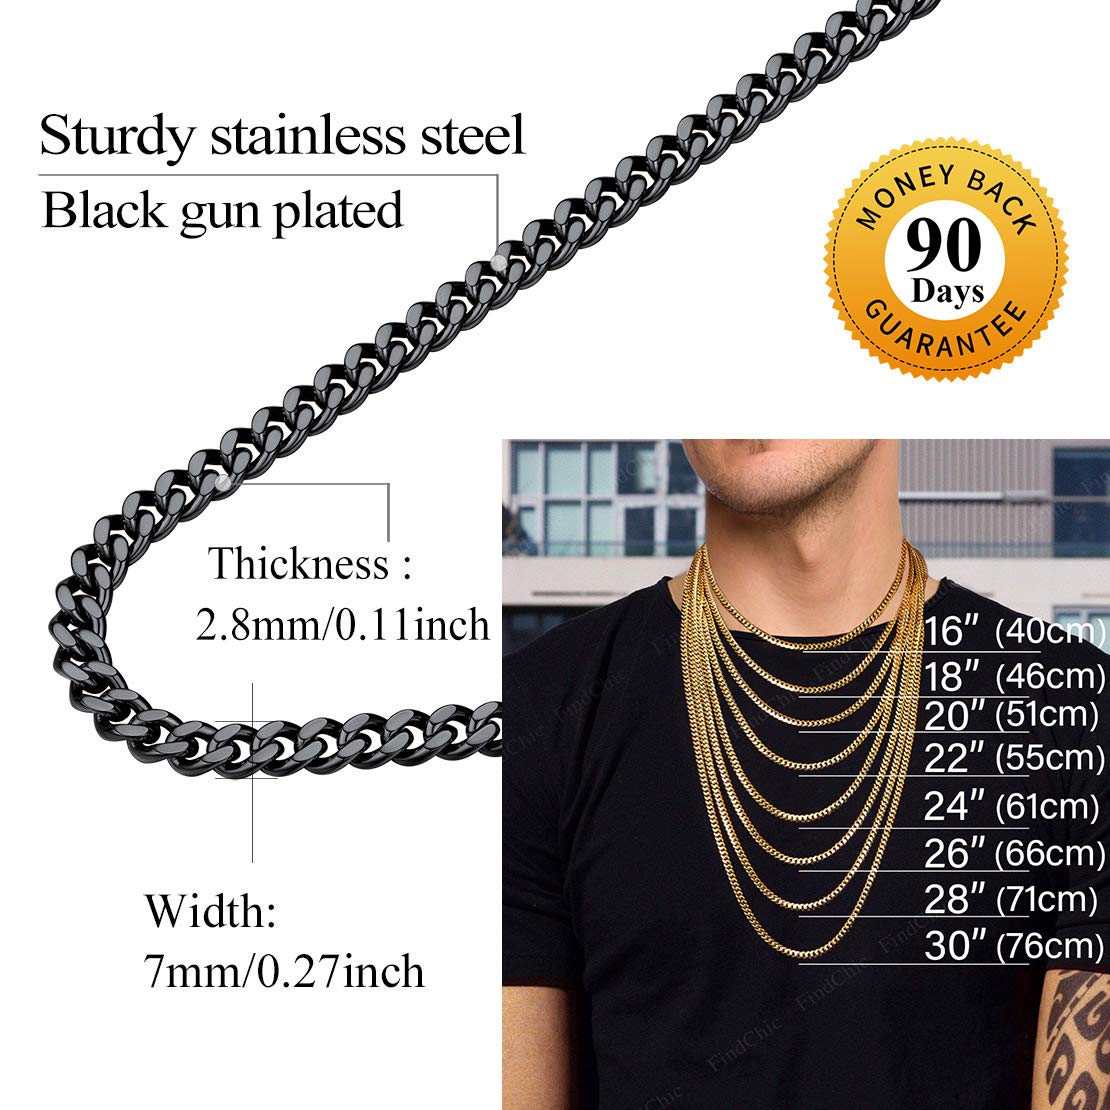 FindChic Men Curb Chain Necklace 18K Gold Plated/Stainless Steel/Black Chunky Double Tight Cuban Link Hip Hop Neck Chains for Men Boys 3.5MM/5MM/6MM/7MM/9MM/12MM 14''-30'' 8 Length Options (Send Gift Box)